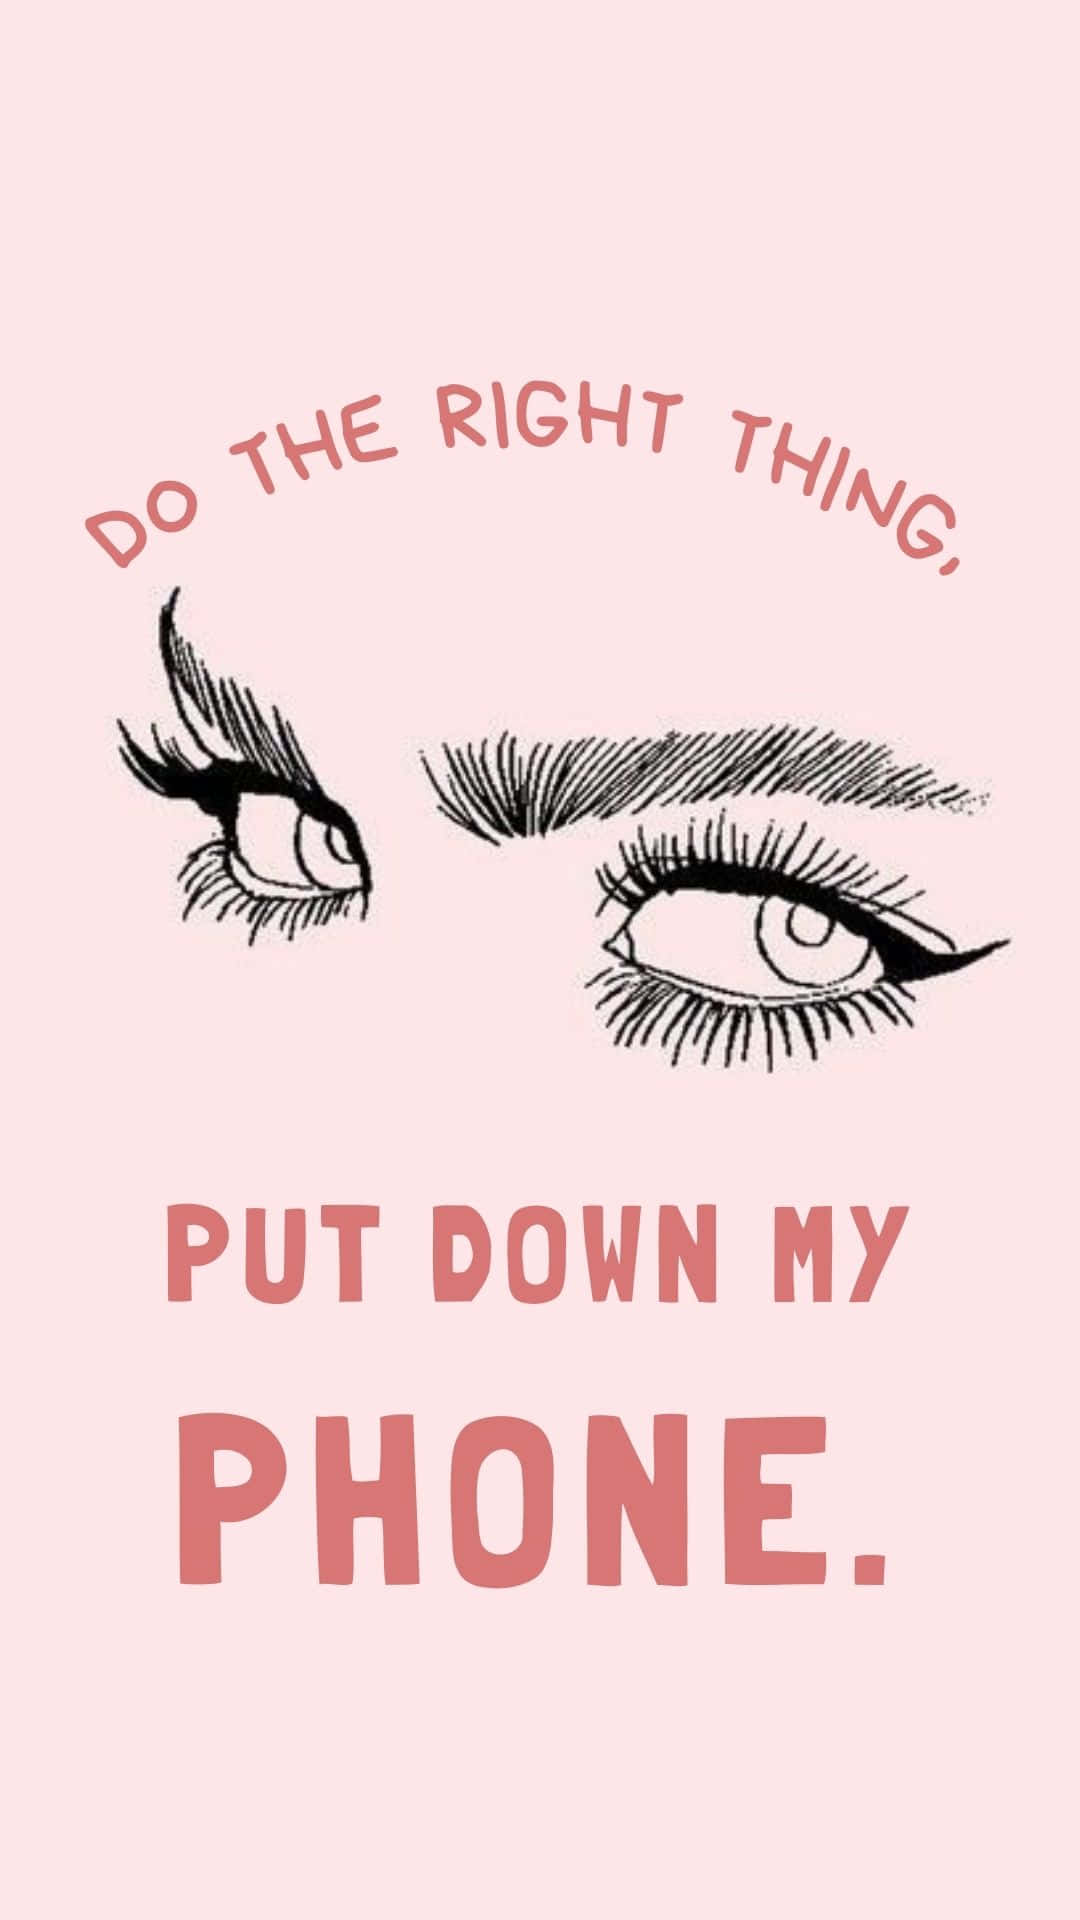 A strong reminder to Put Down My Phone. Wallpaper